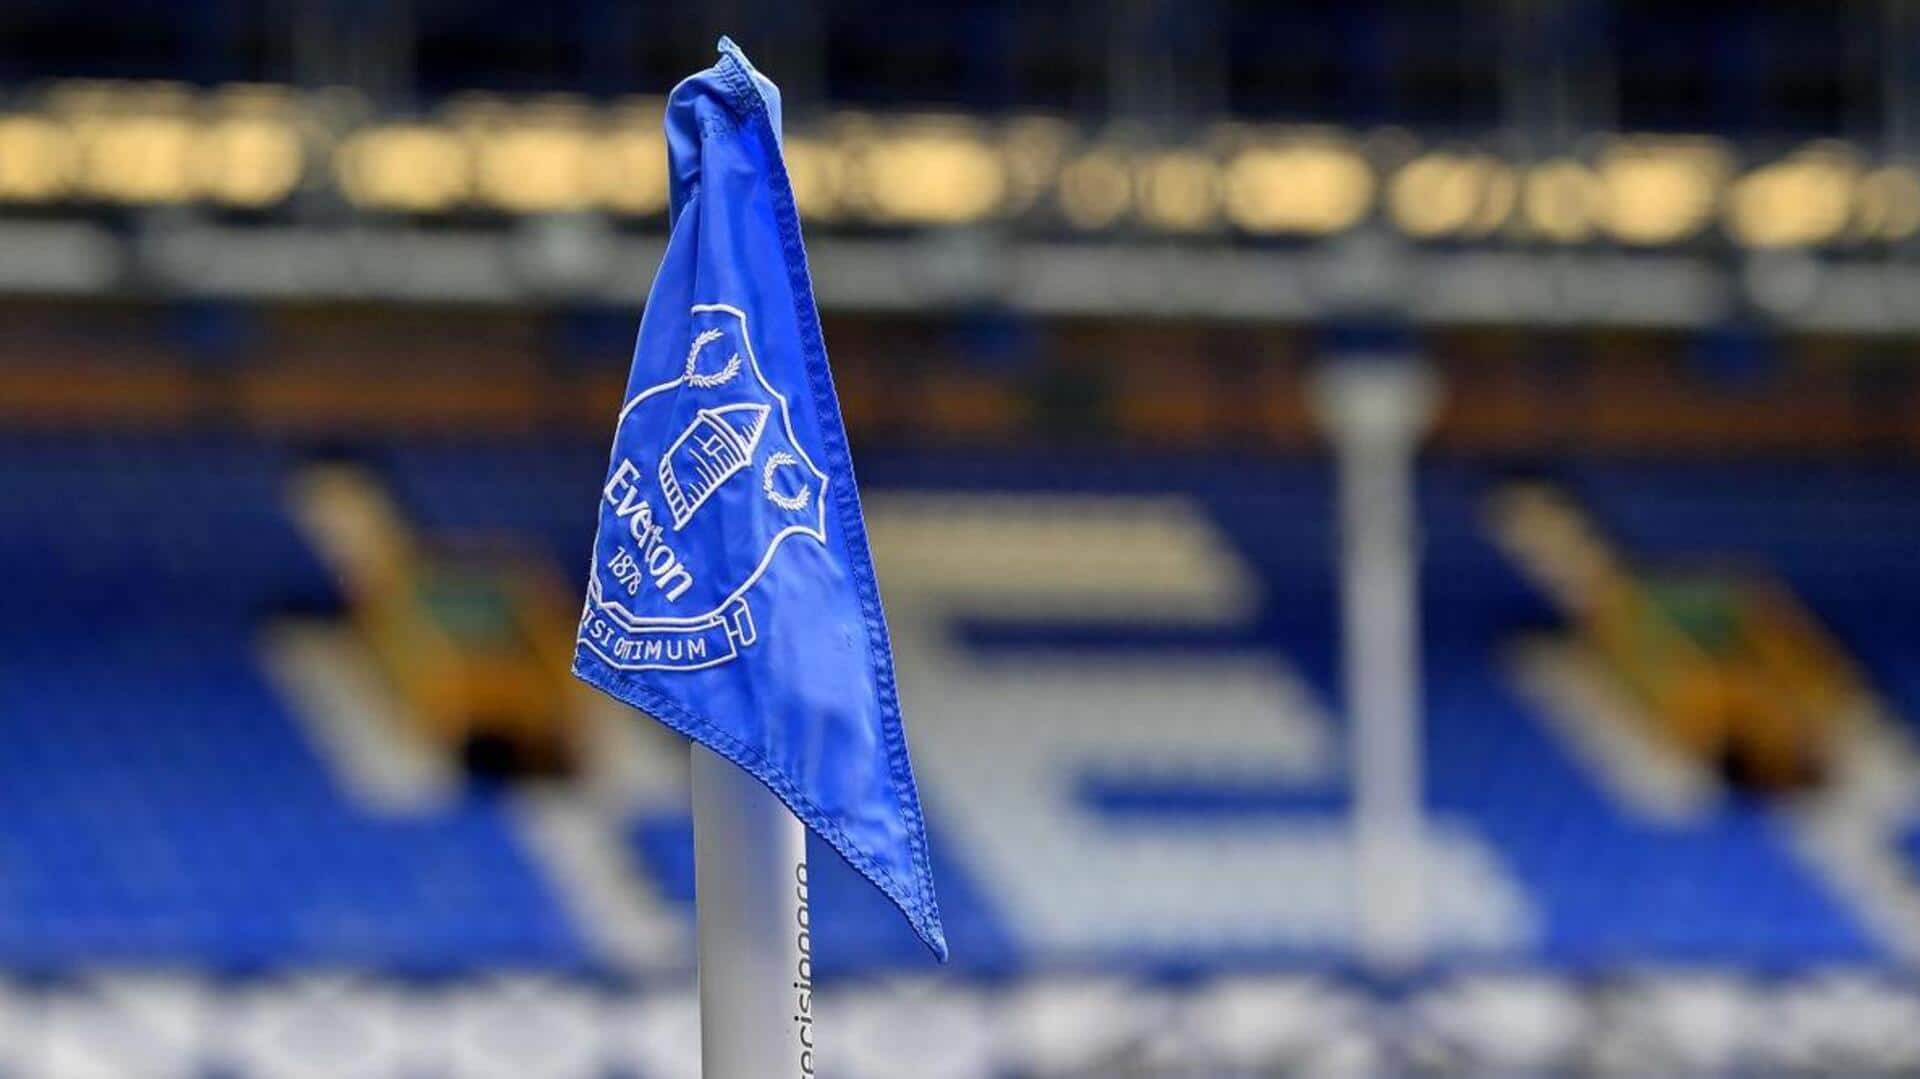 Everton handed 10-point deduction in the Premier League: Here's why